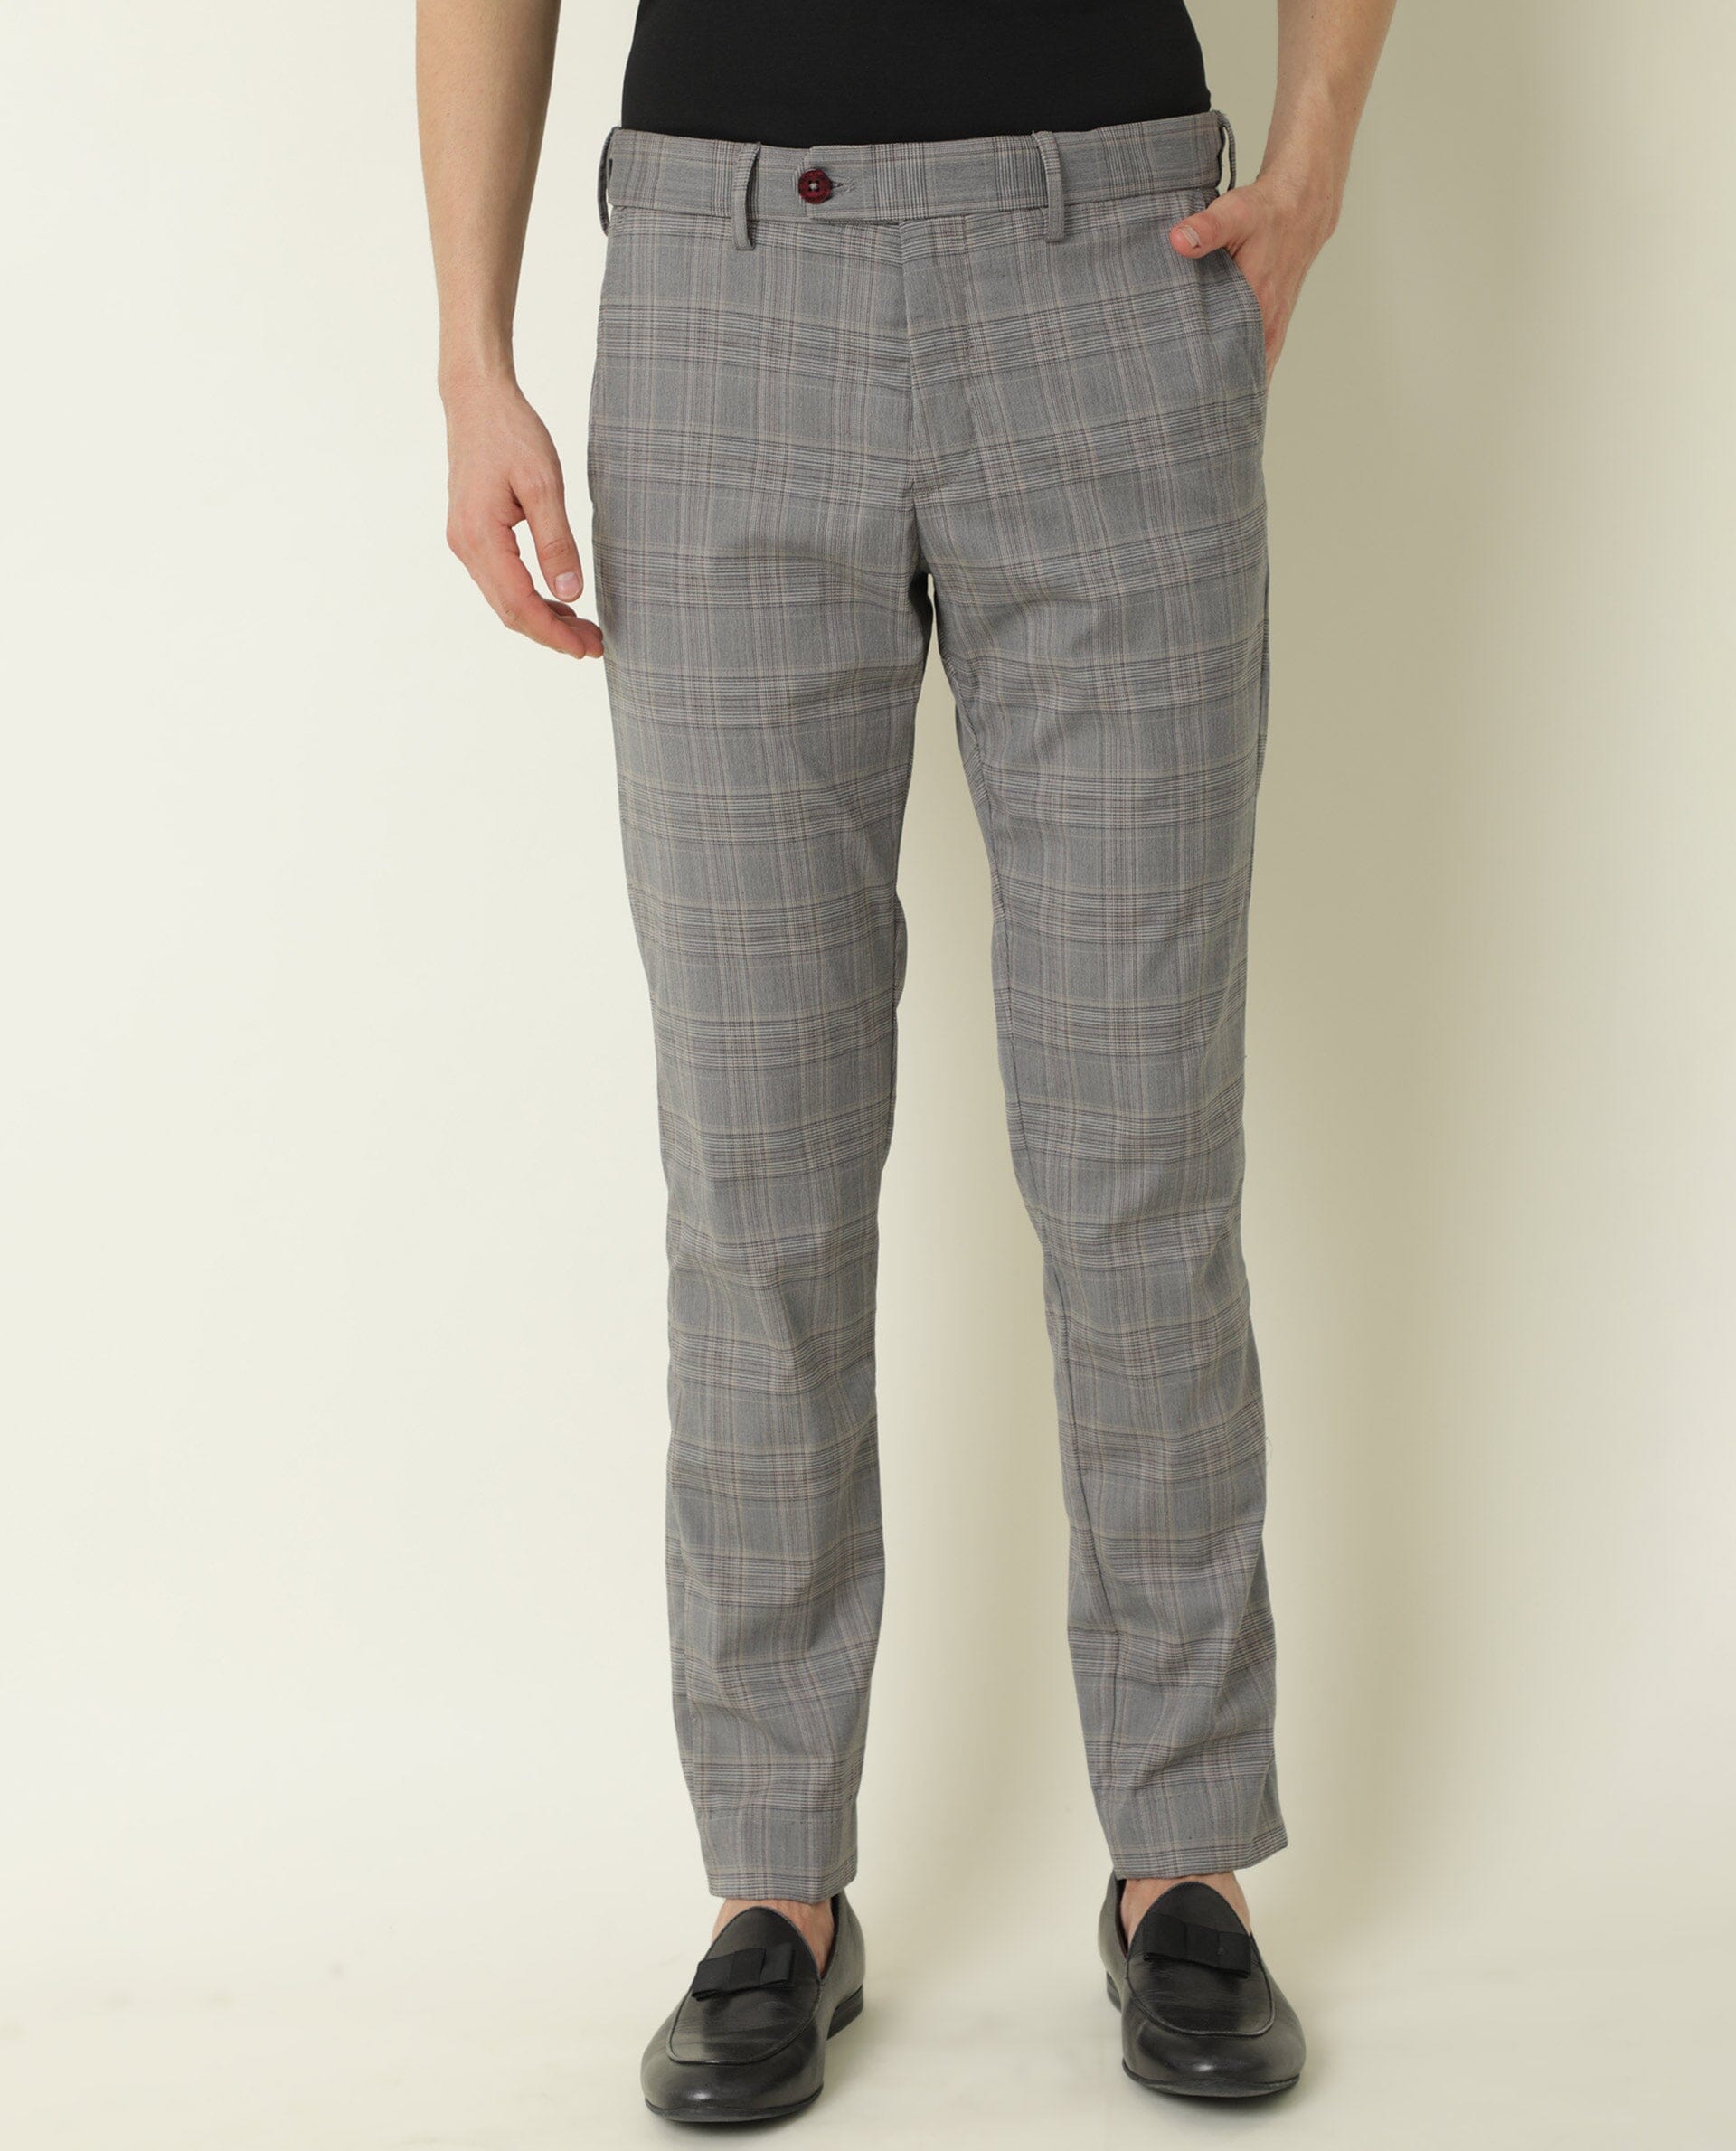 Highgrove Woven in Italy Slim Fit Grey Check Trousers – tmlewinuk